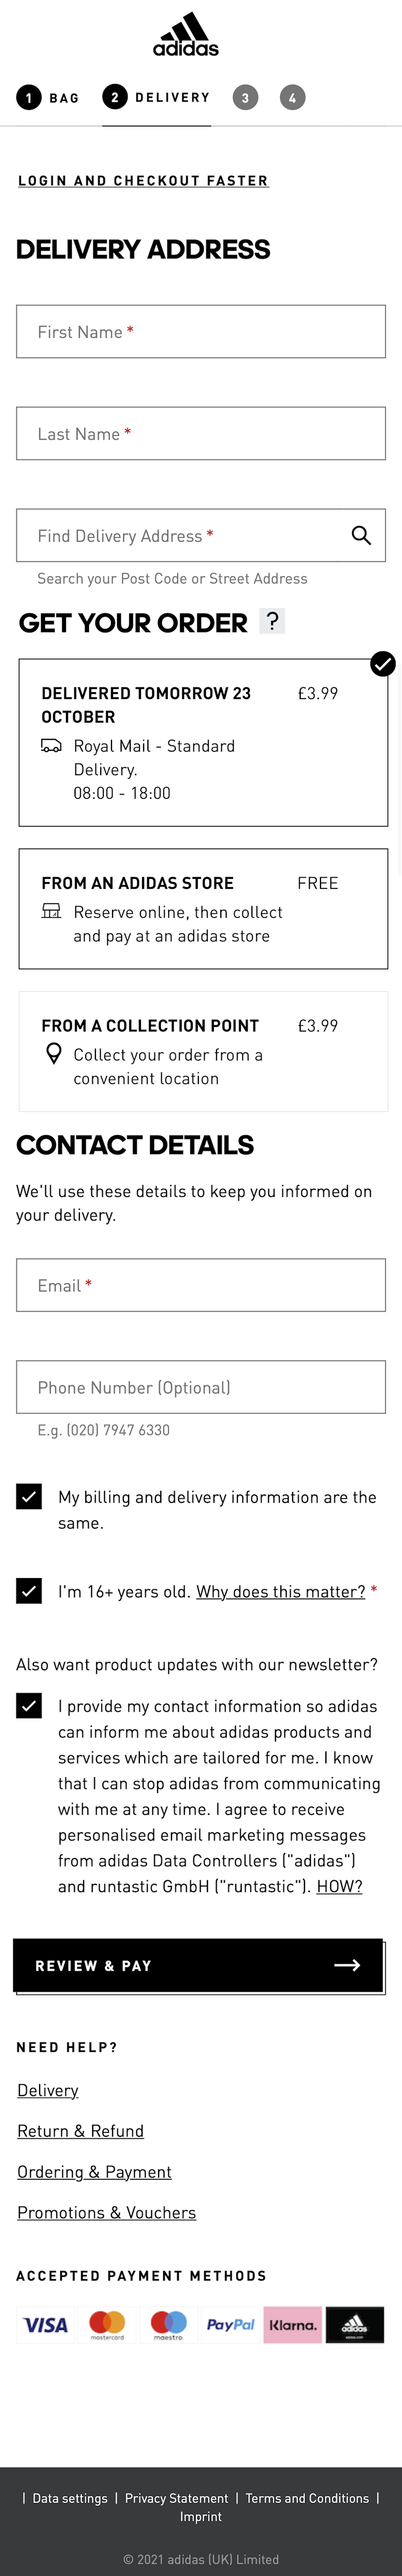 Adidas' Mobile Delivery Shipping Methods 184 of 646 Delivery & Shipping Examples – Baymard Institute